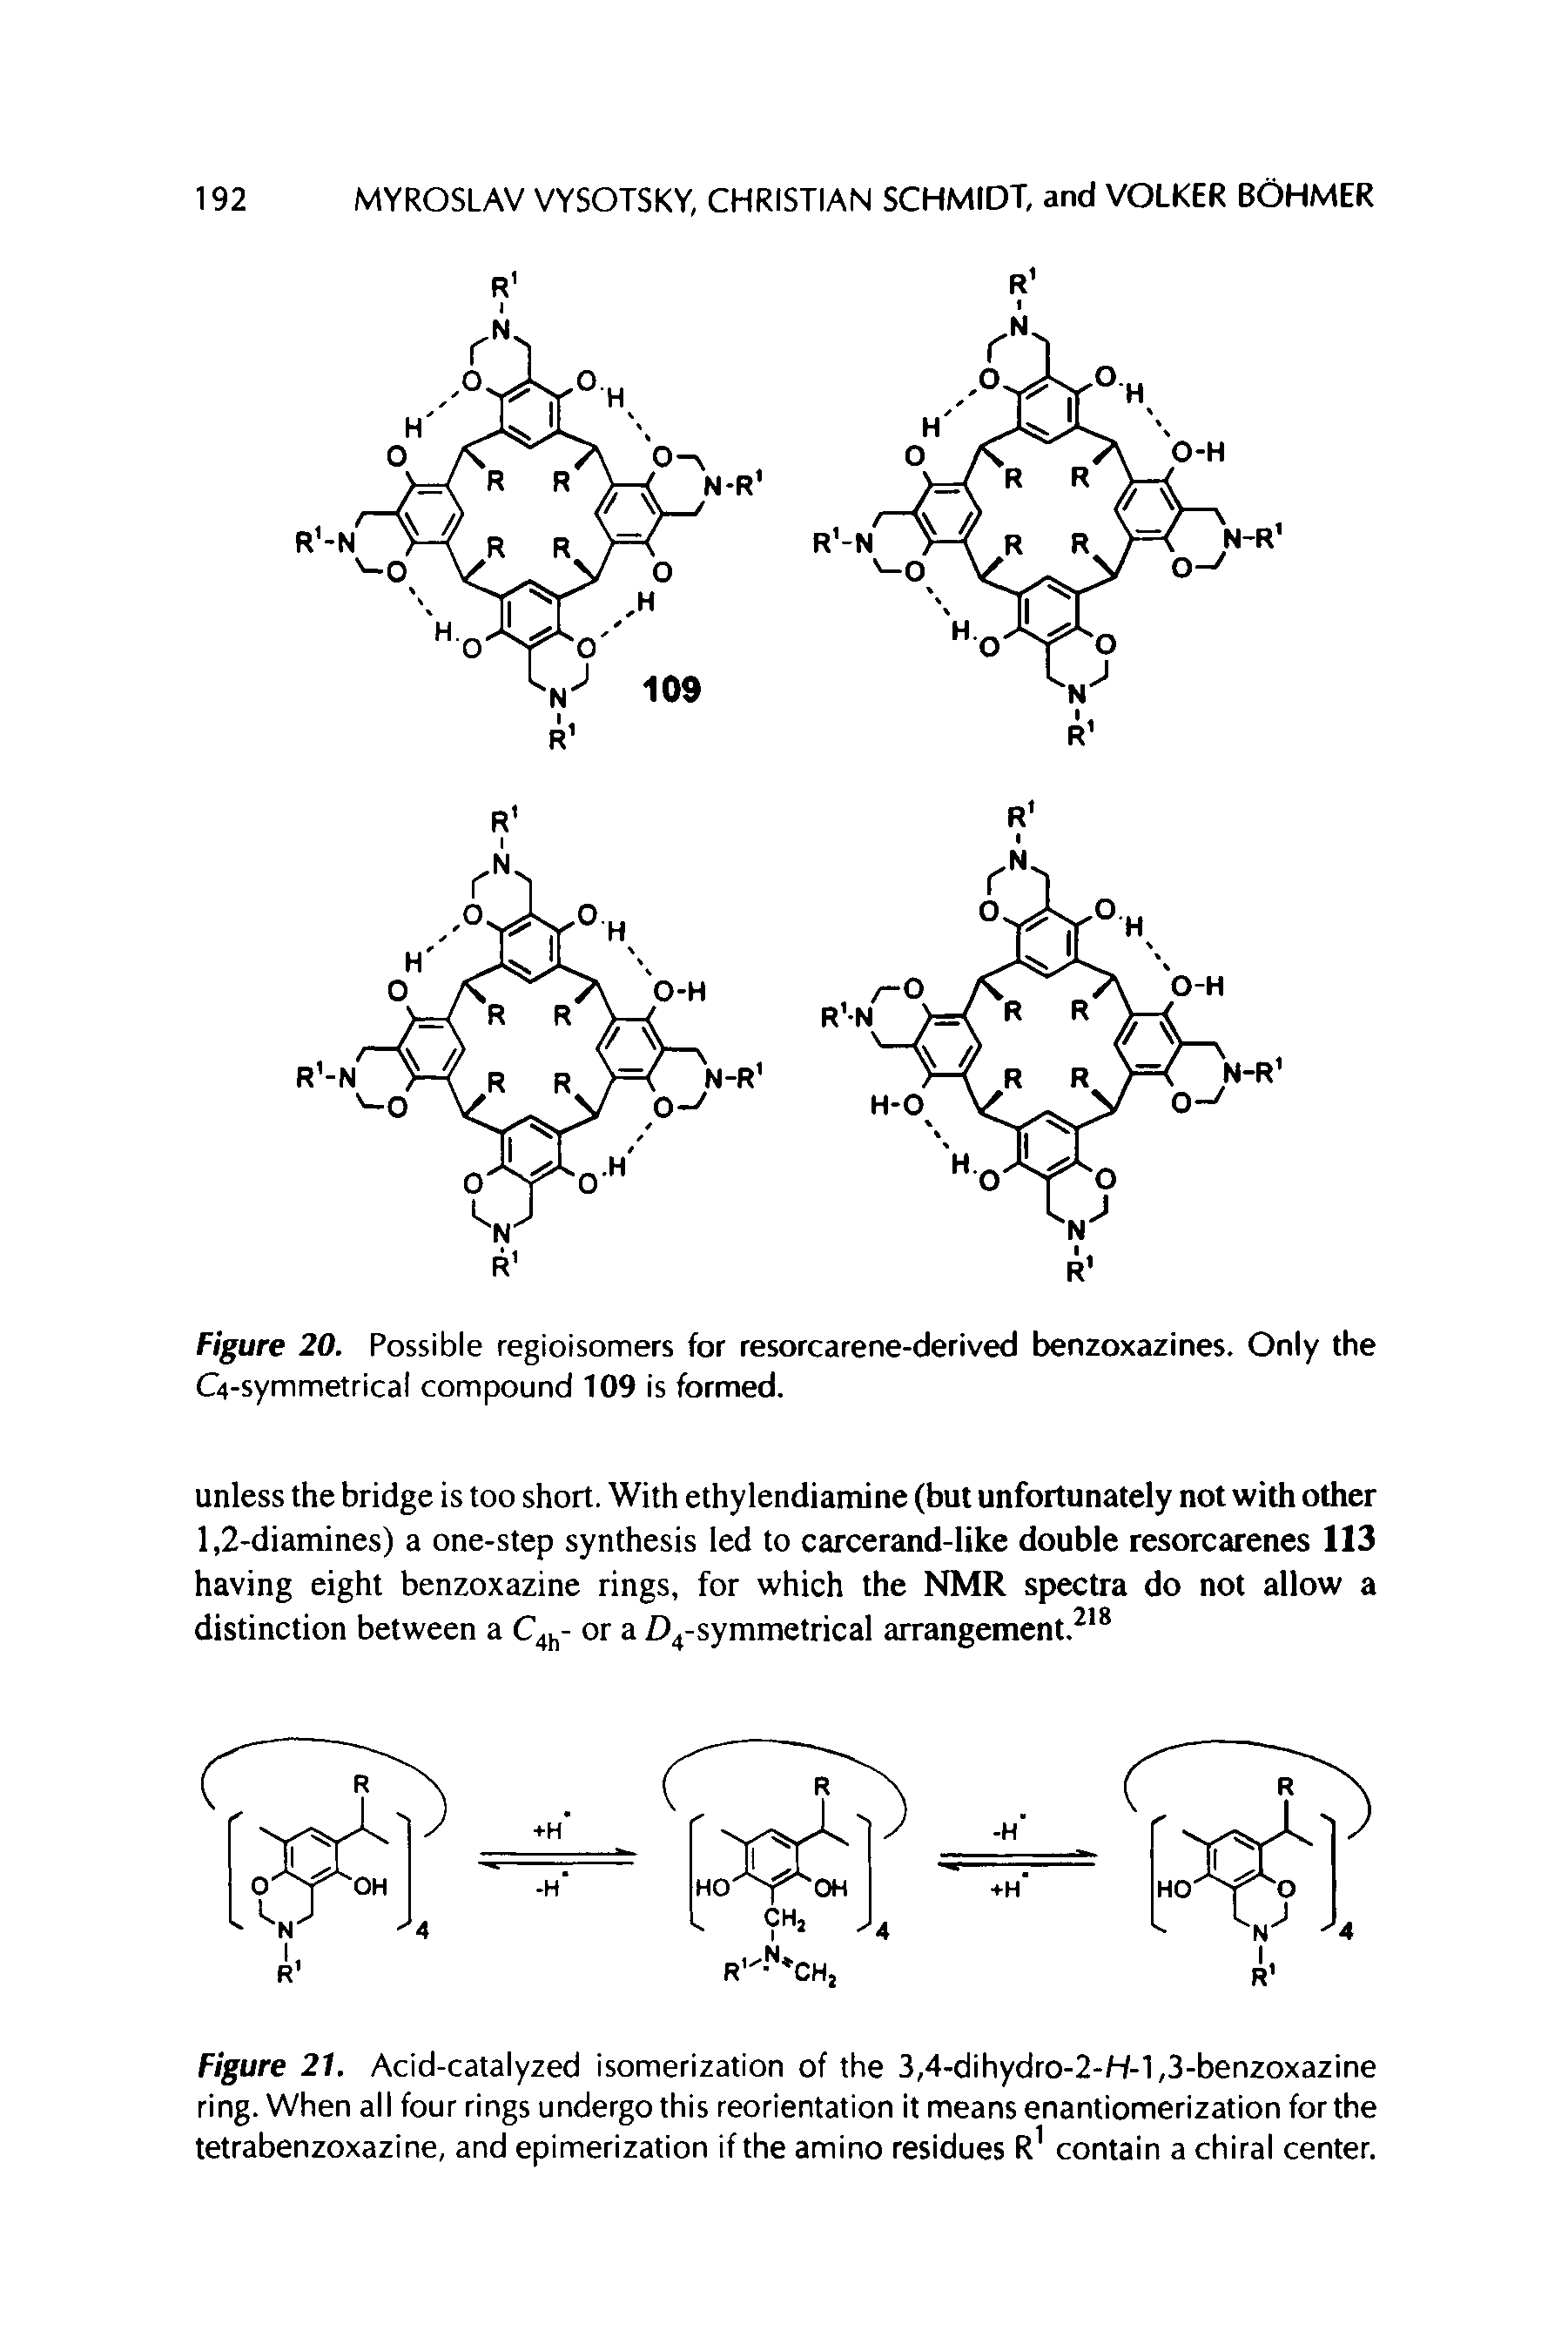 Figure 21. Acid-catalyzed isomerization of the 3,4-dihydro-2-H-1,3-benzoxazine ring. When all four rings undergo this reorientation it means enantiomerization for the tetrabenzoxazine, and epimerization if the amino residues R1 contain a chiral center.